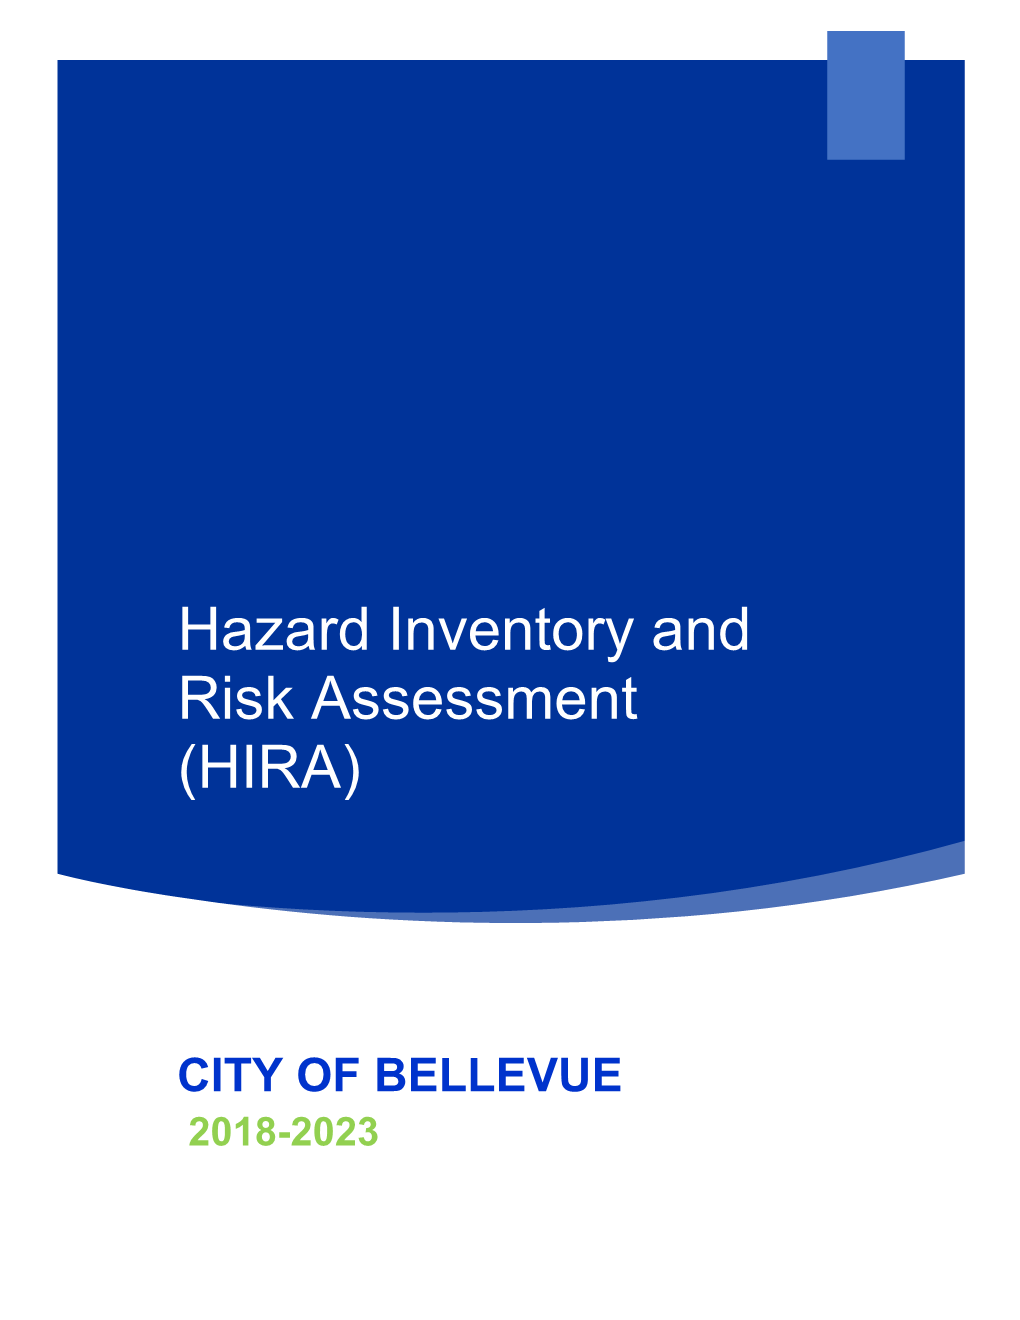 Hazard Inventory and Risk Assessment (HIRA)